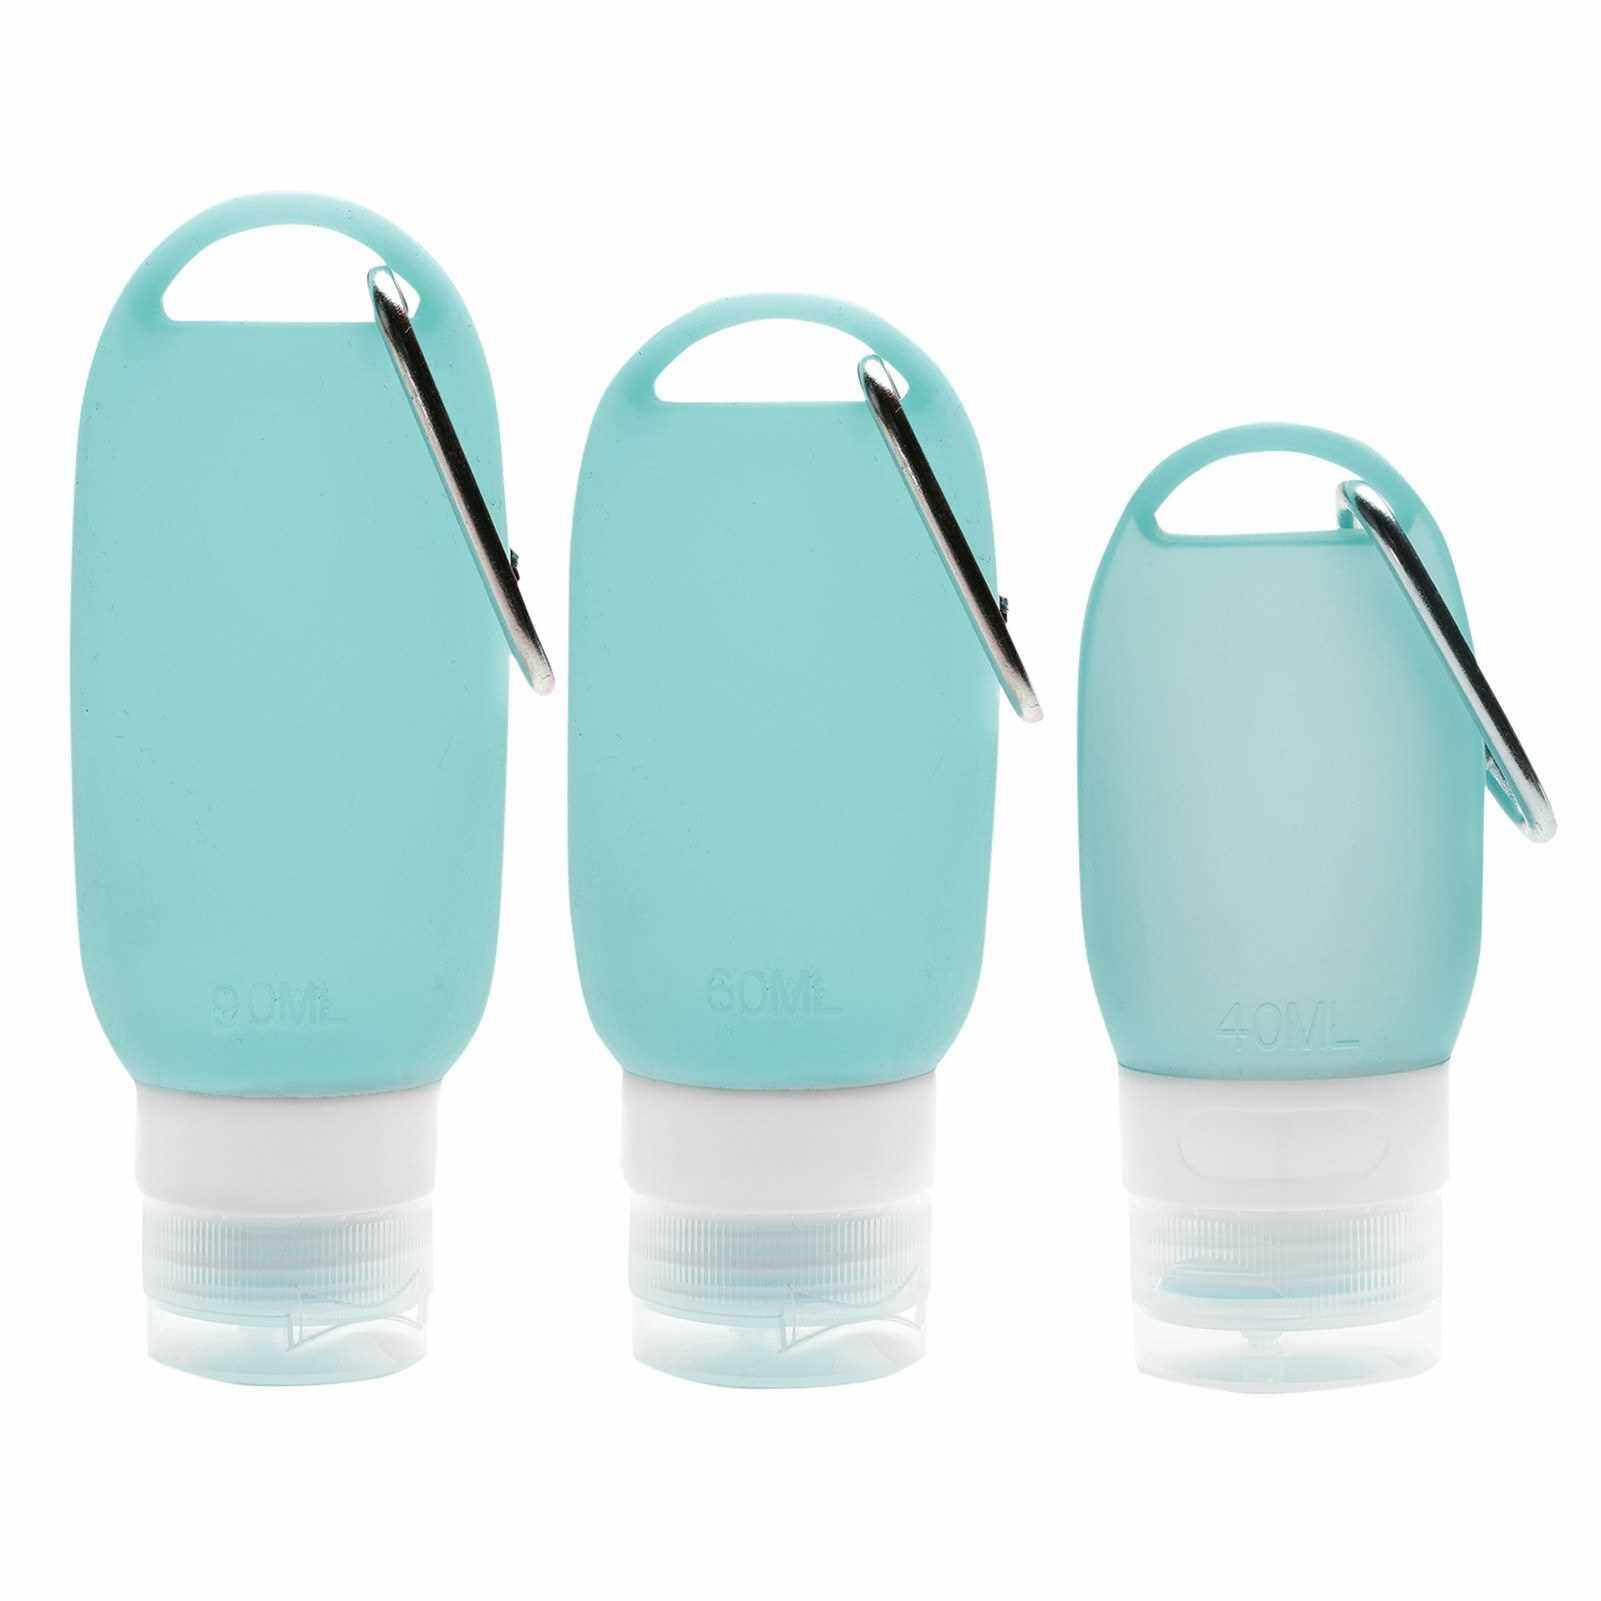 BEST SELLER 3PCS Travel Bottles with Snap Hook Hanging Soft Silicone Portable Refillable Empty Containers for Hand Sanitizer Shampoo Flip Cap School Work Outdoor (Turquoise)